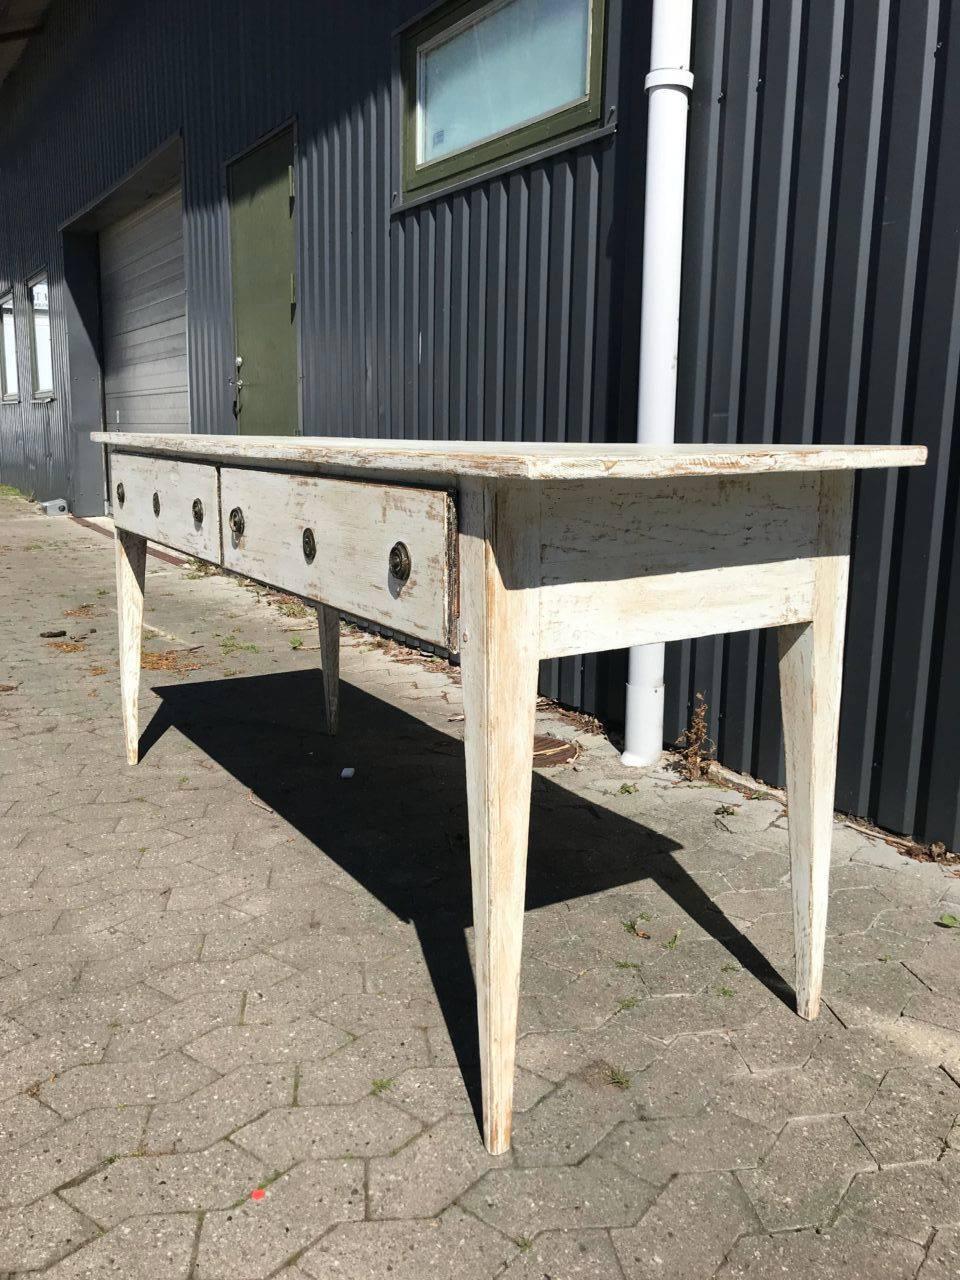 Charming vintage French console table, Louis XVI style, with lovely groovework in the tapered legs. There are two drawers, with charming round handles, and had been painted a gorgeous creamy white shade. Super patina. An attractive and practical